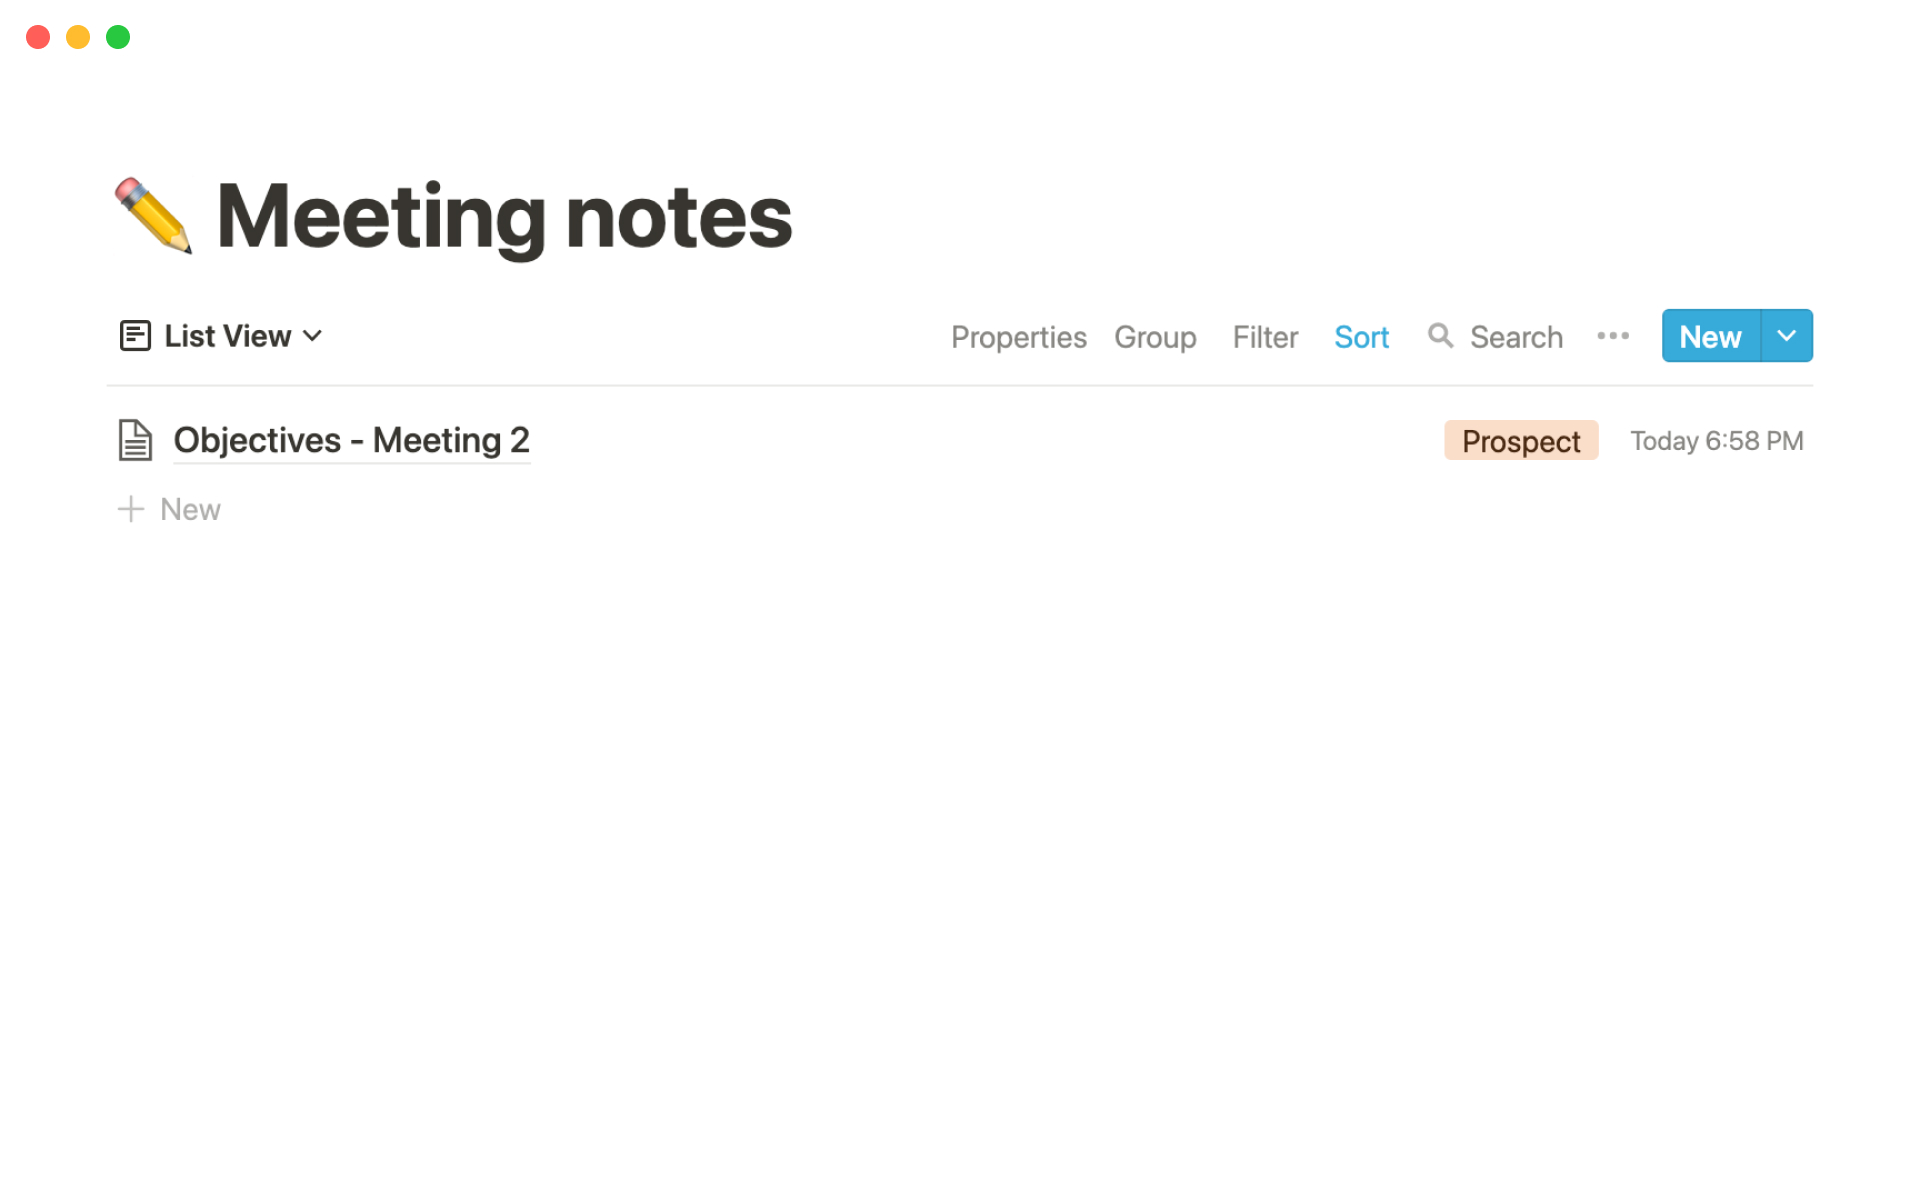 The desktop image for the Meeting notes template